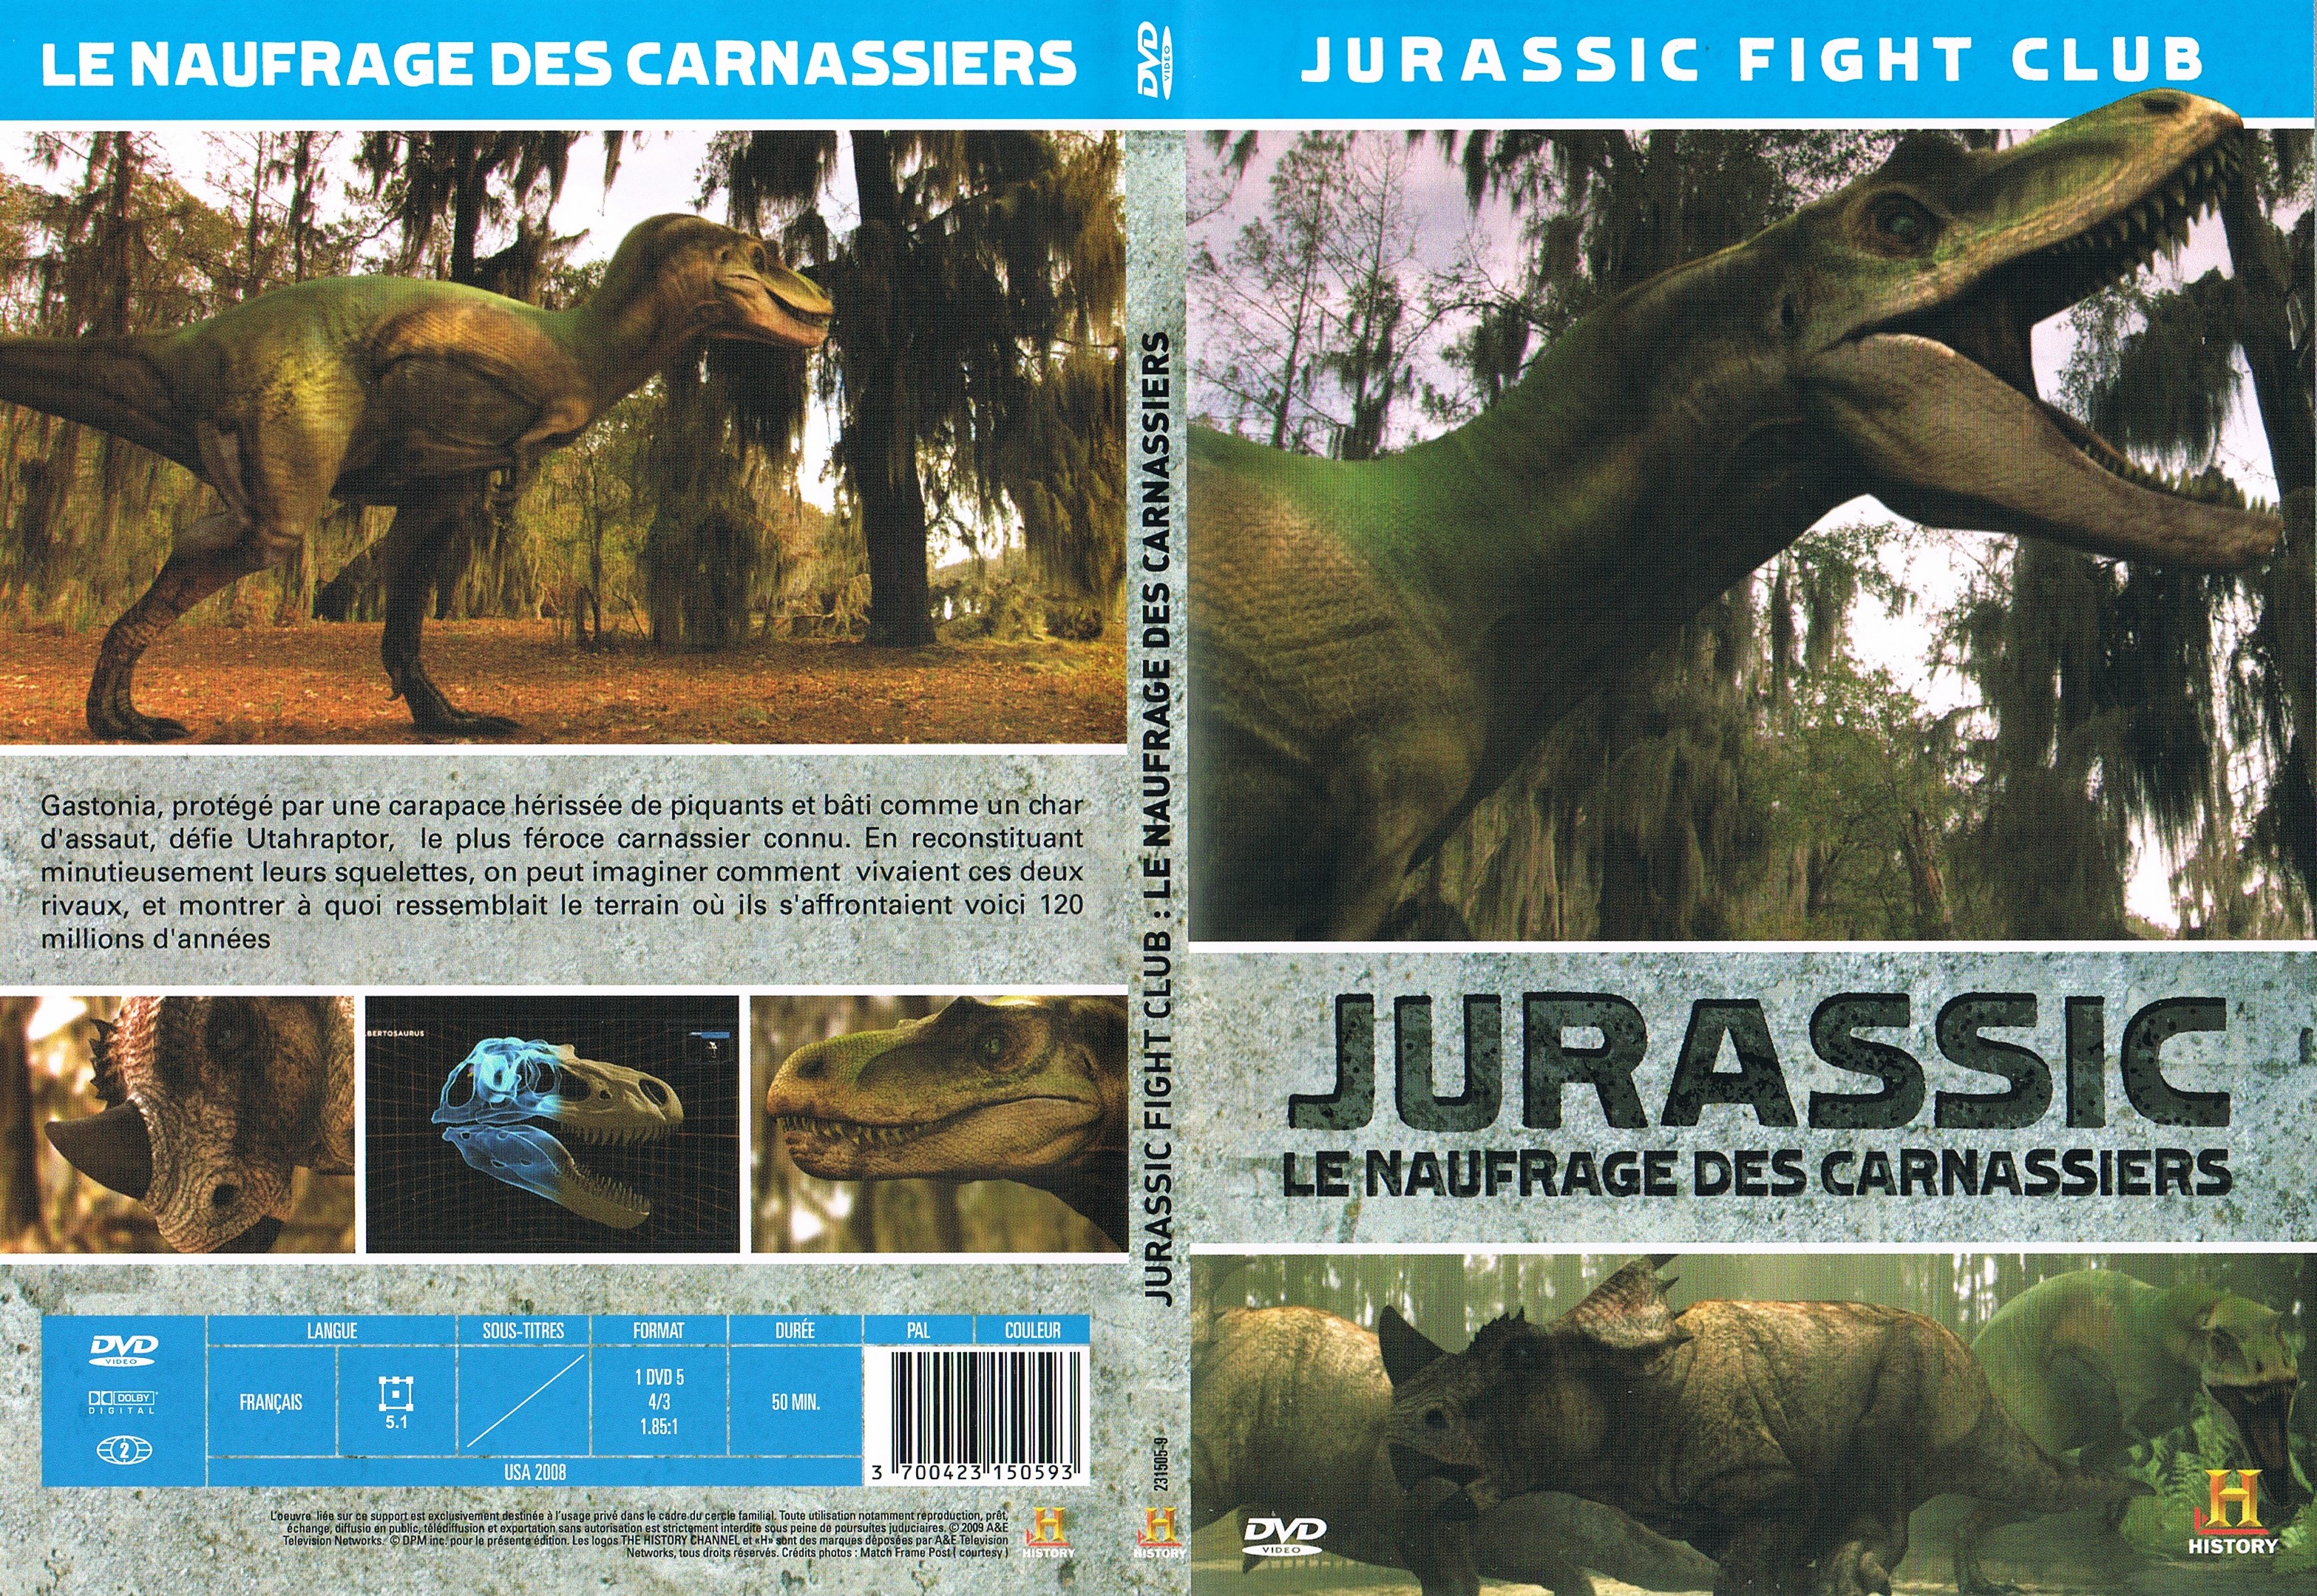 Jaquette DVD Jurassic Fight Club - Le Naufrage Des Carnassiers